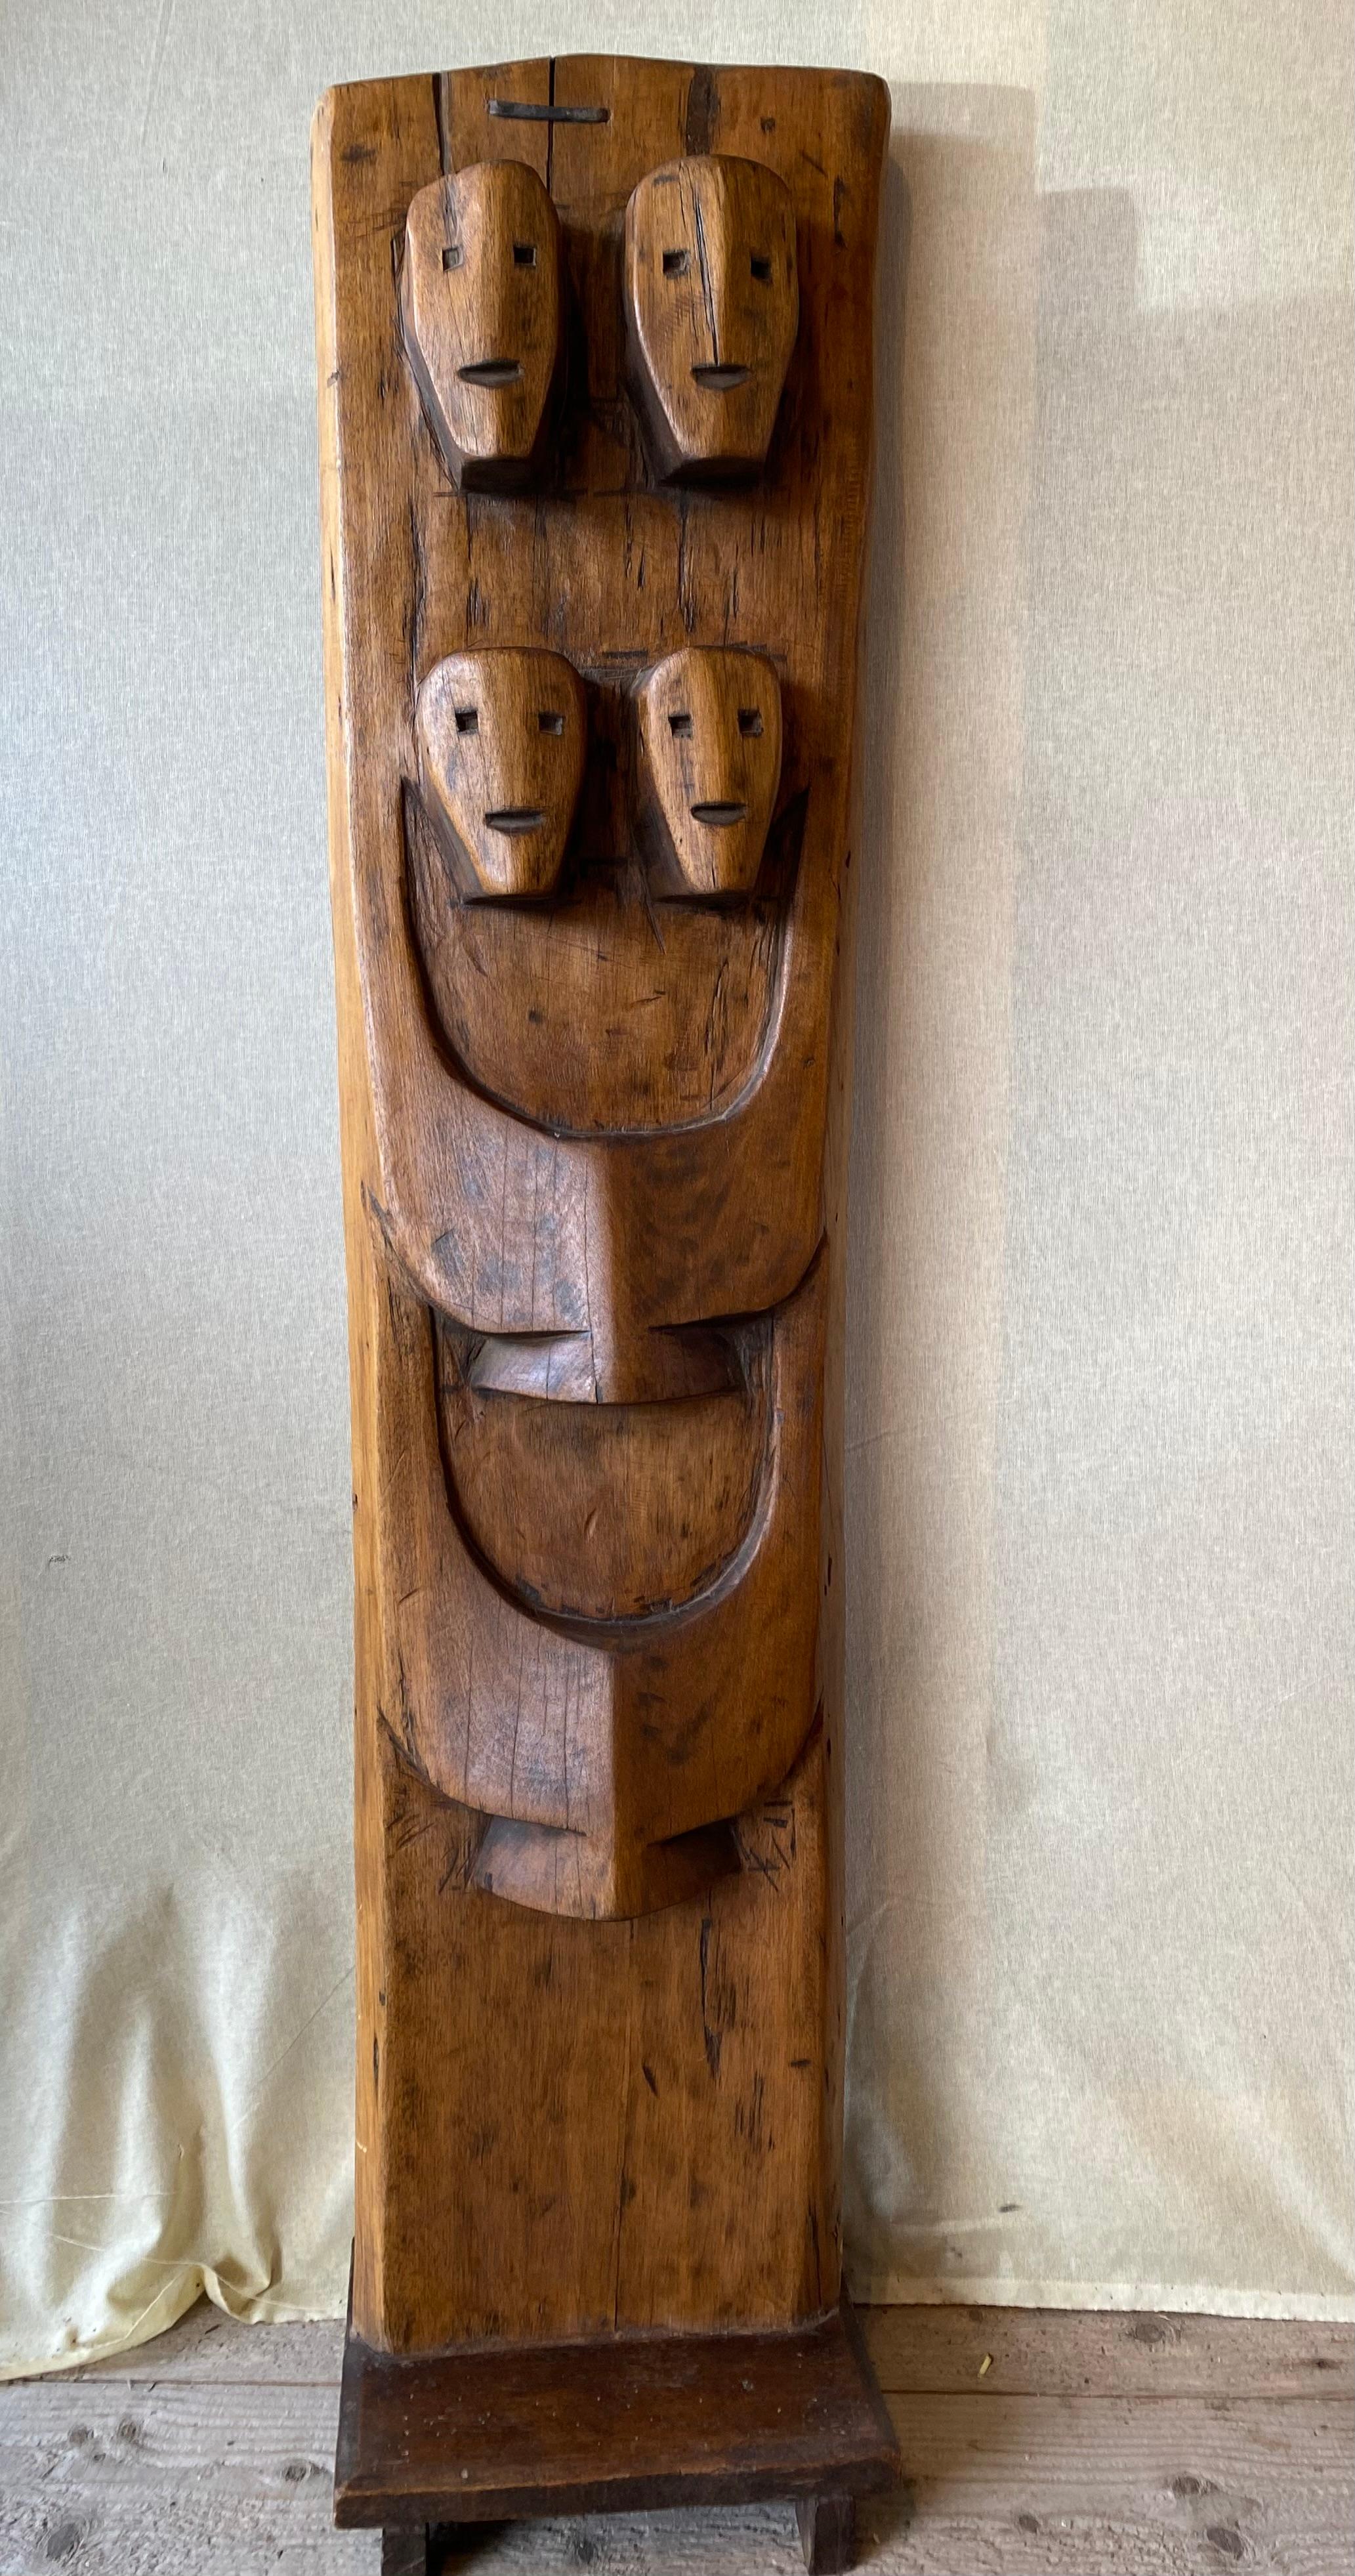 Totem panel from Nagaland
The Naga people lives on Indo-Burmese border.
They was head cutter Hunter 
They made their furniture by digging tree trunks giving a re fines and brutalist style. Tjhe stand has been added but it can be removed easily for